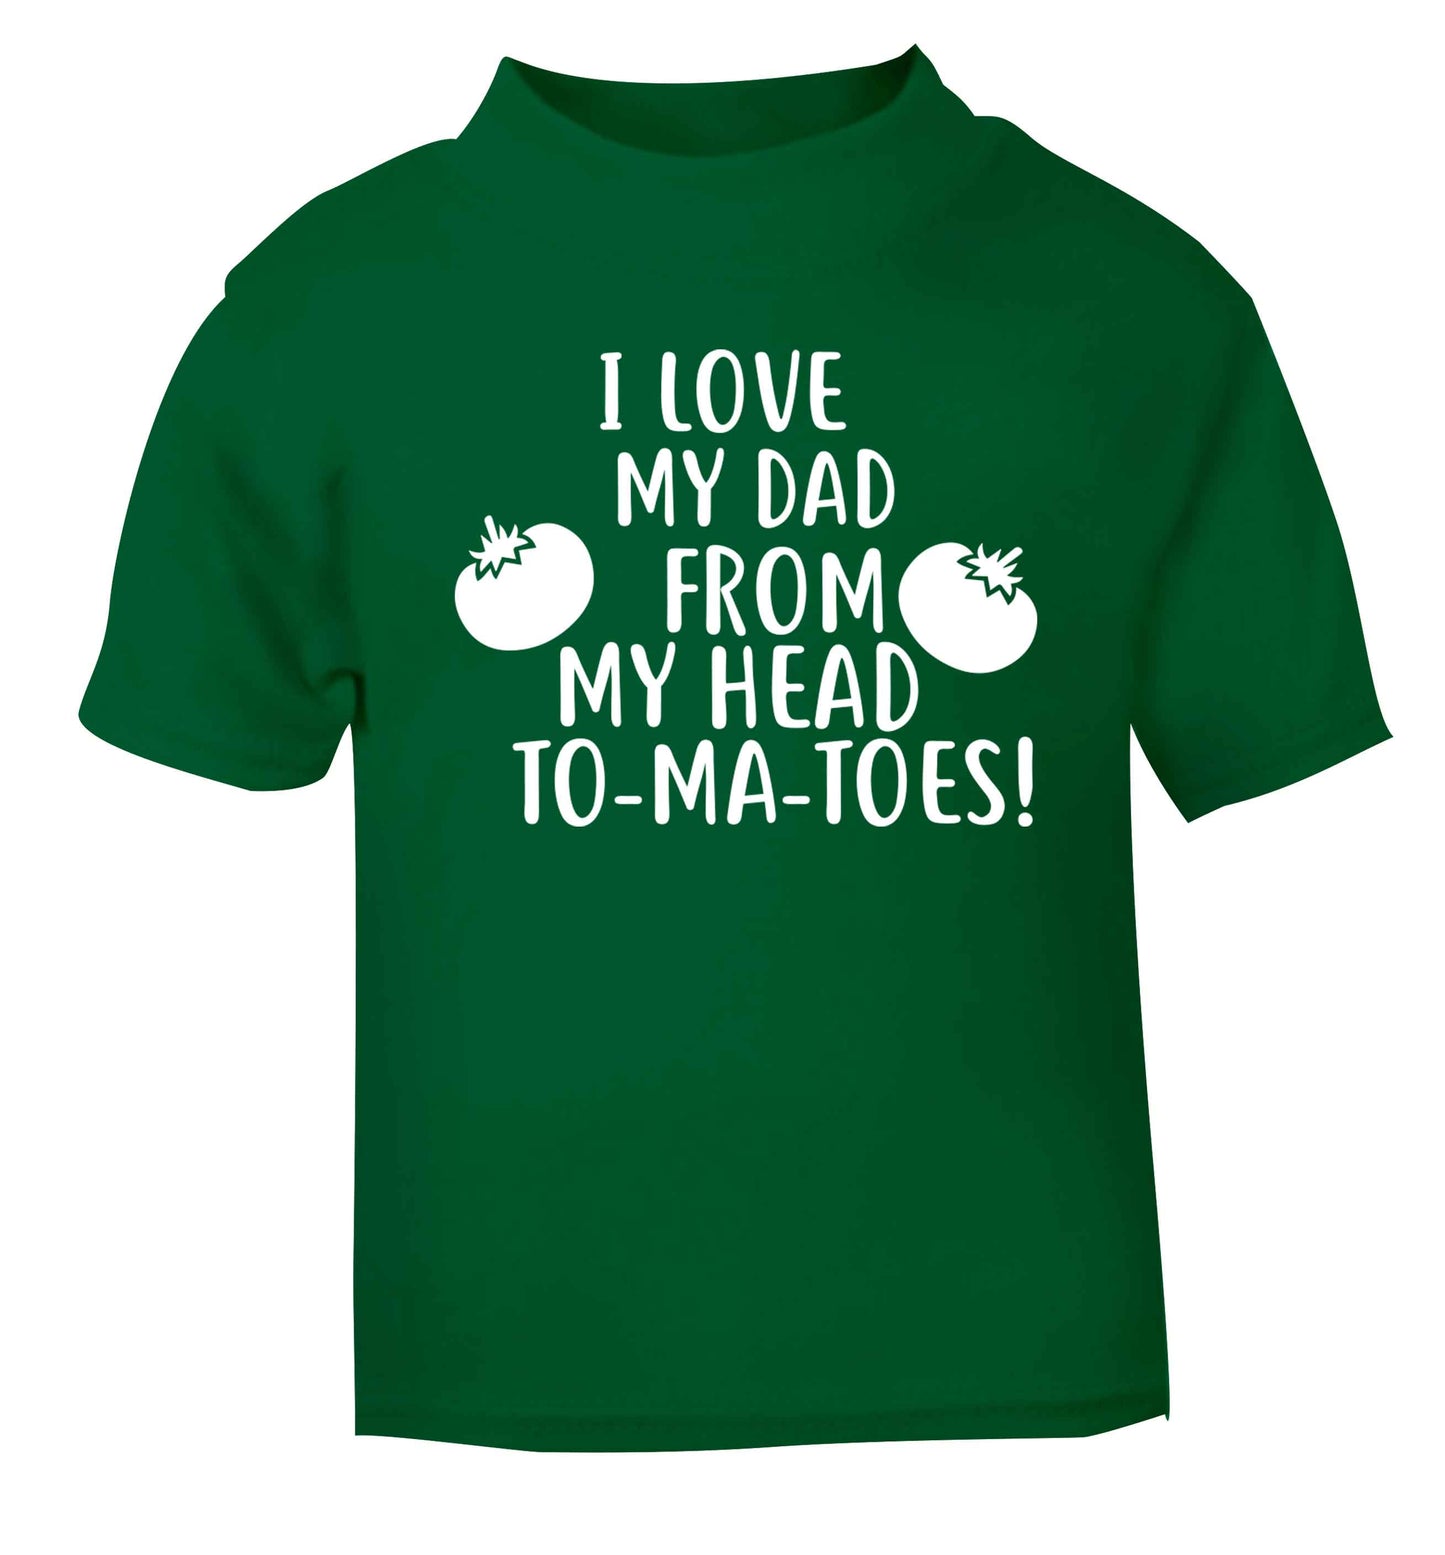 I love my dad from my head to-ma-toes green baby toddler Tshirt 2 Years